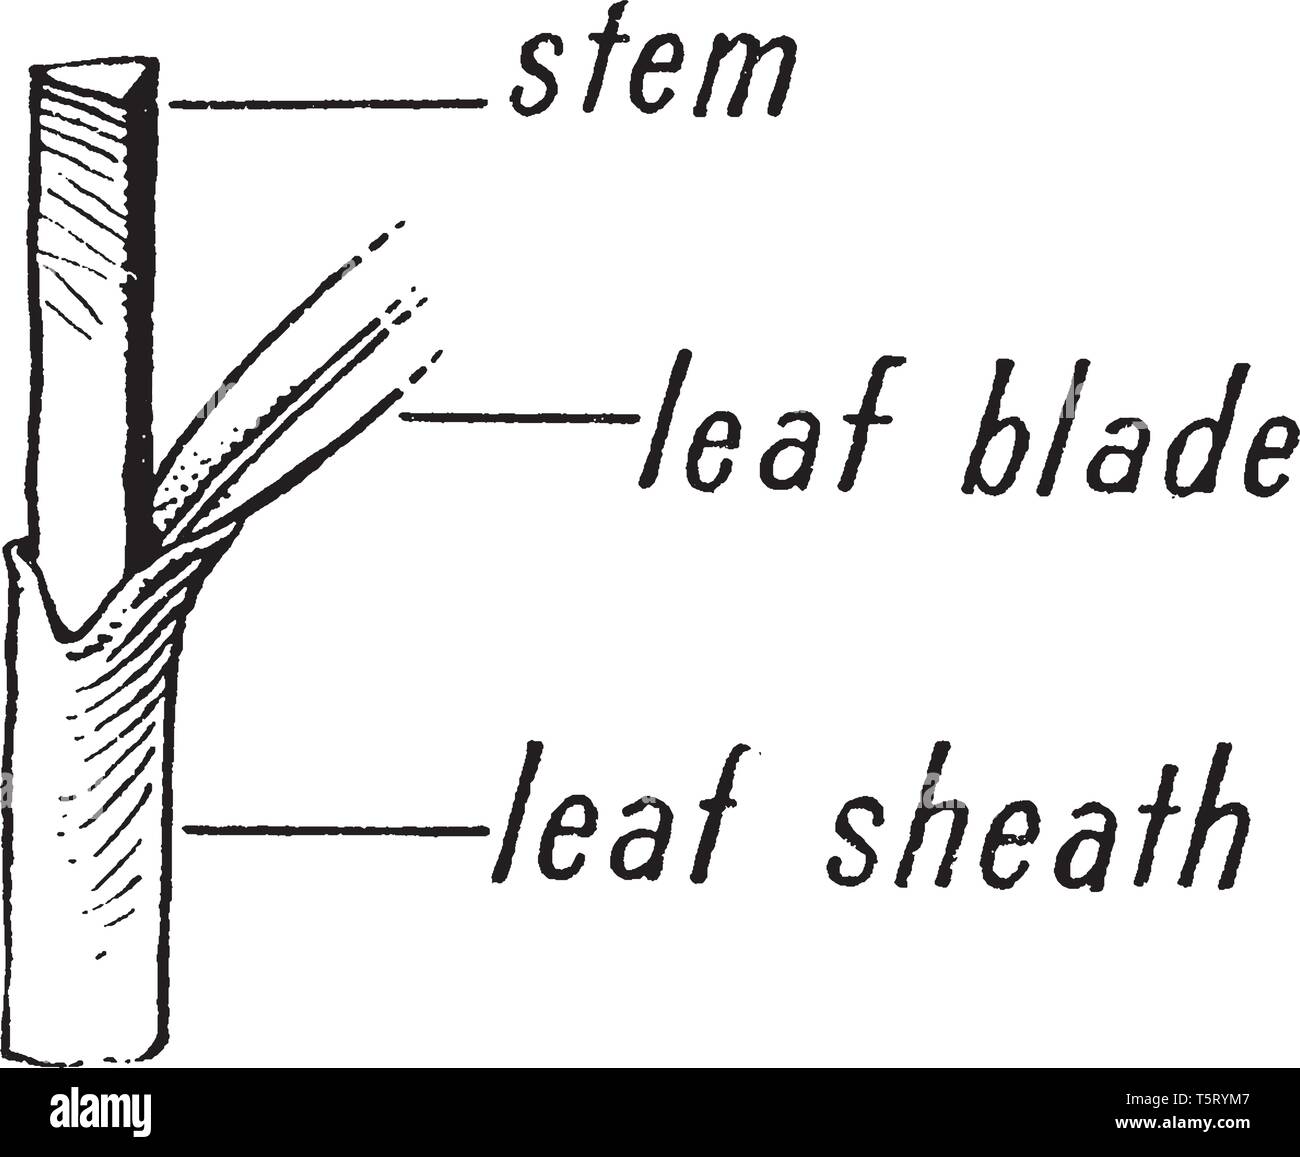 Picture of Sedge morphology plant. Picture shows its stem, leaf blade and leaf sheath part. Stems are with triangular cross-sections, vintage line dra Stock Vector